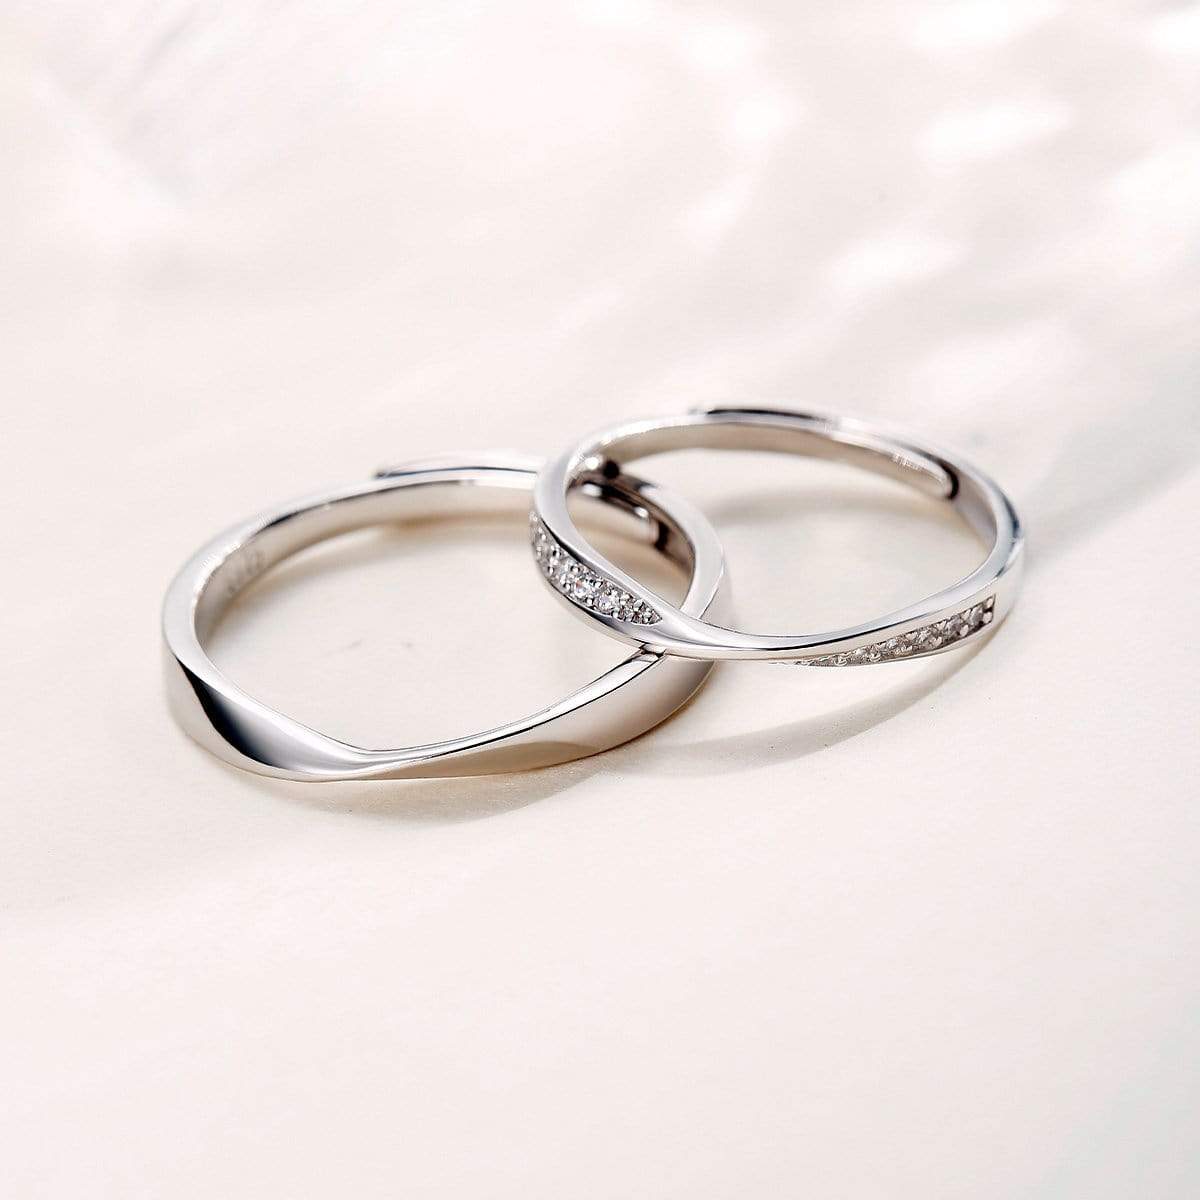 FANCIME "Connected" Couples Band Sterling Silver Rings Show